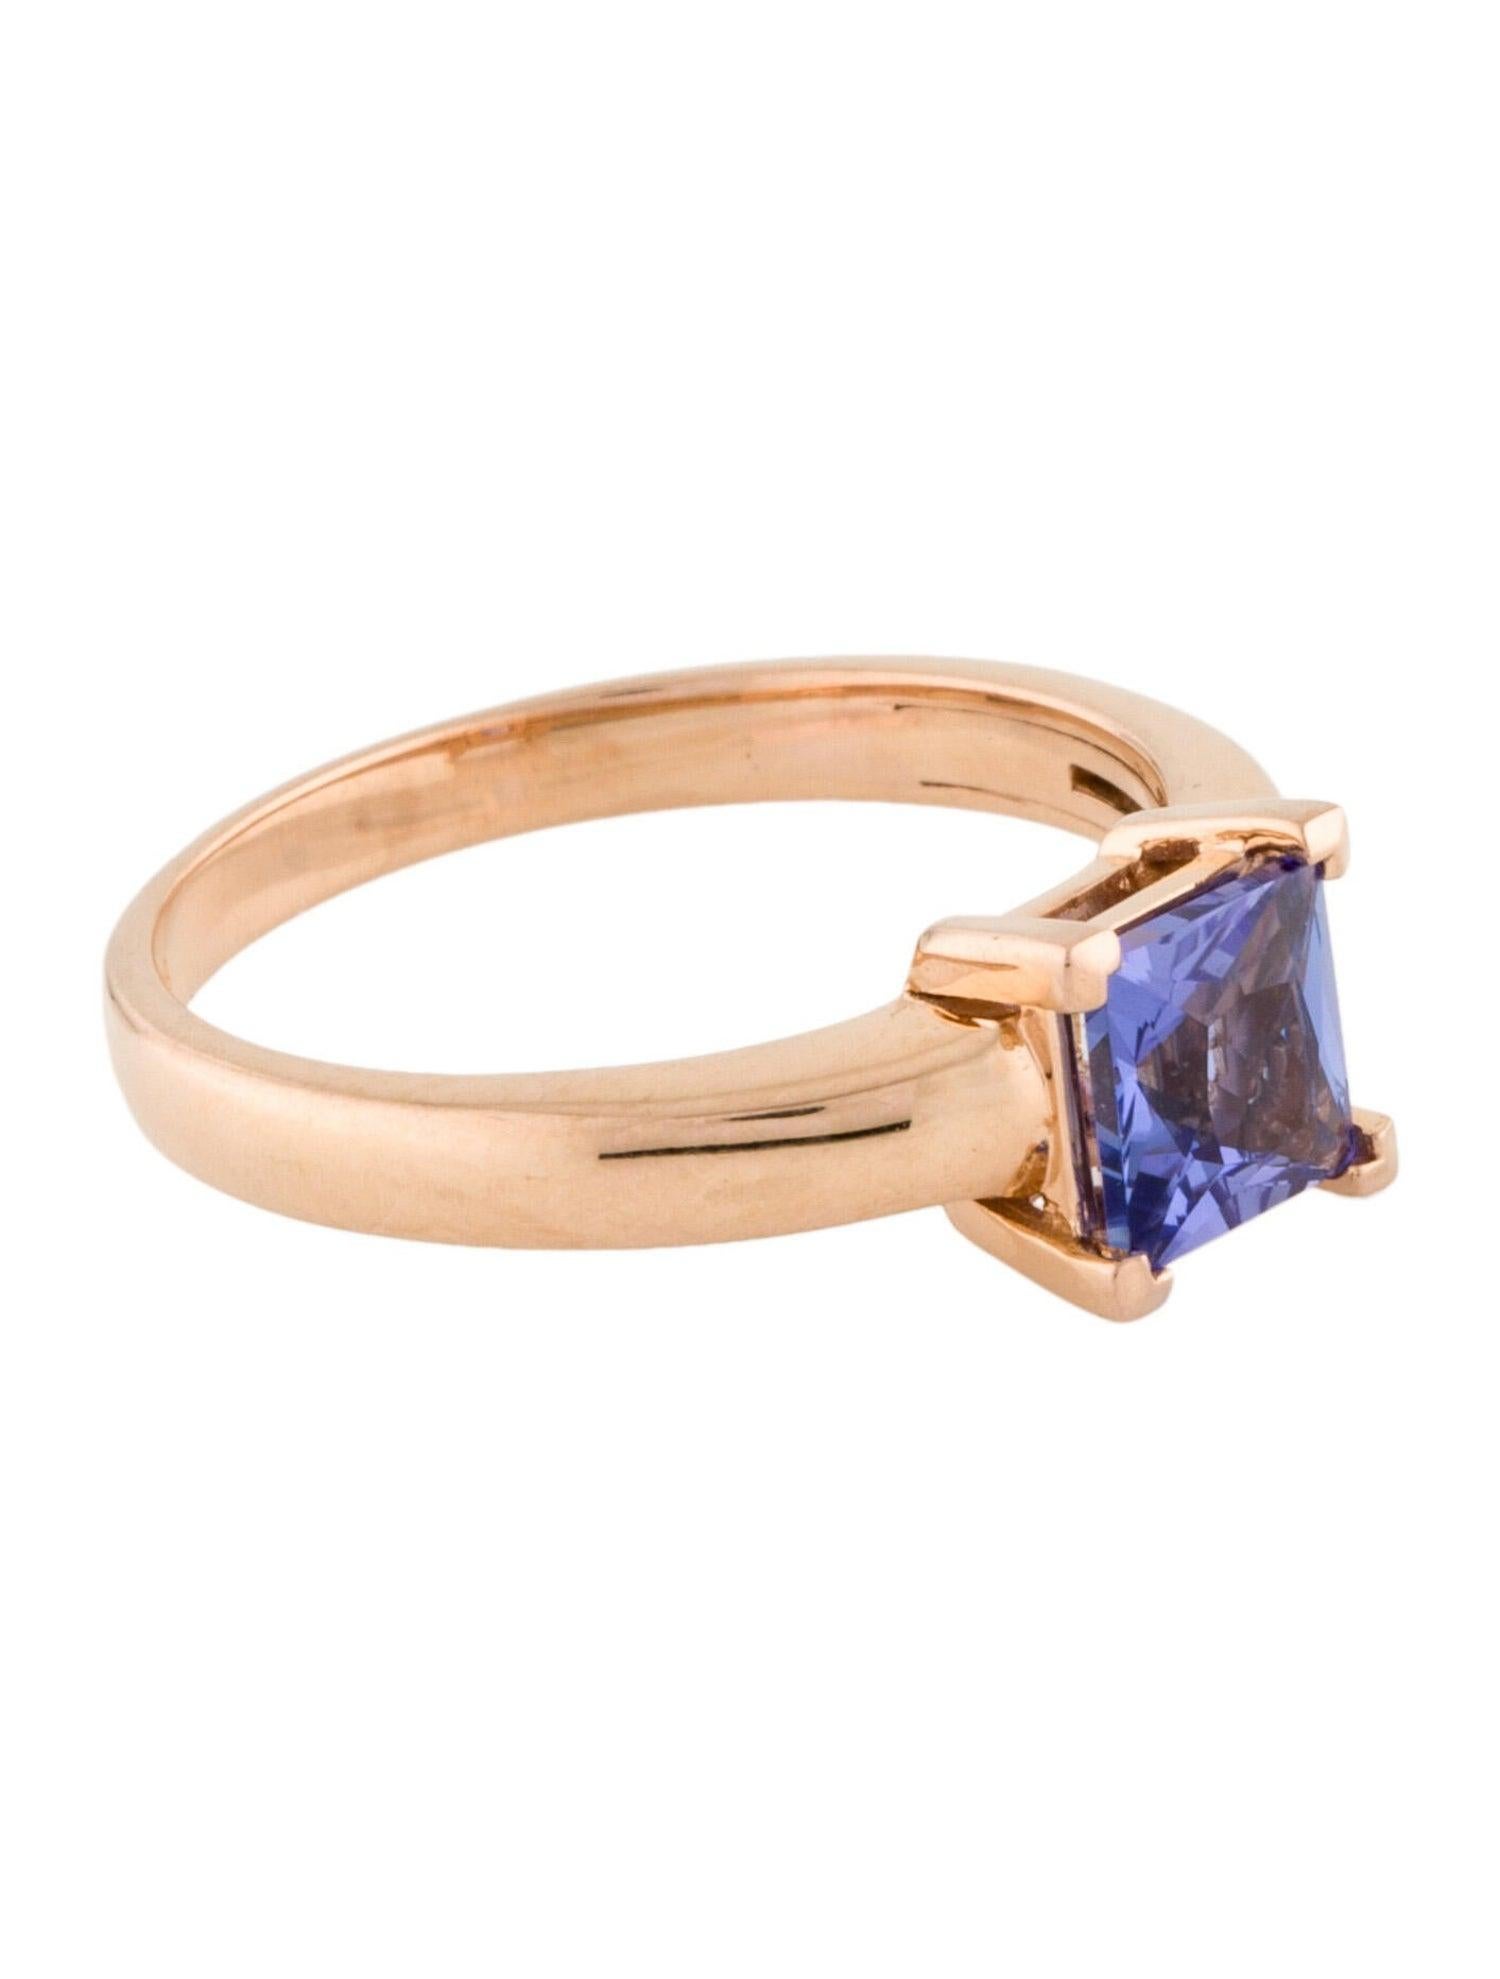 Elevate your jewelry collection with our exquisite Starry Night Tanzanite Ring from The Beauty of the Night Sky collection by Jeweltique. This luxurious piece encapsulates the celestial allure of the night sky, showcasing a carefully selected